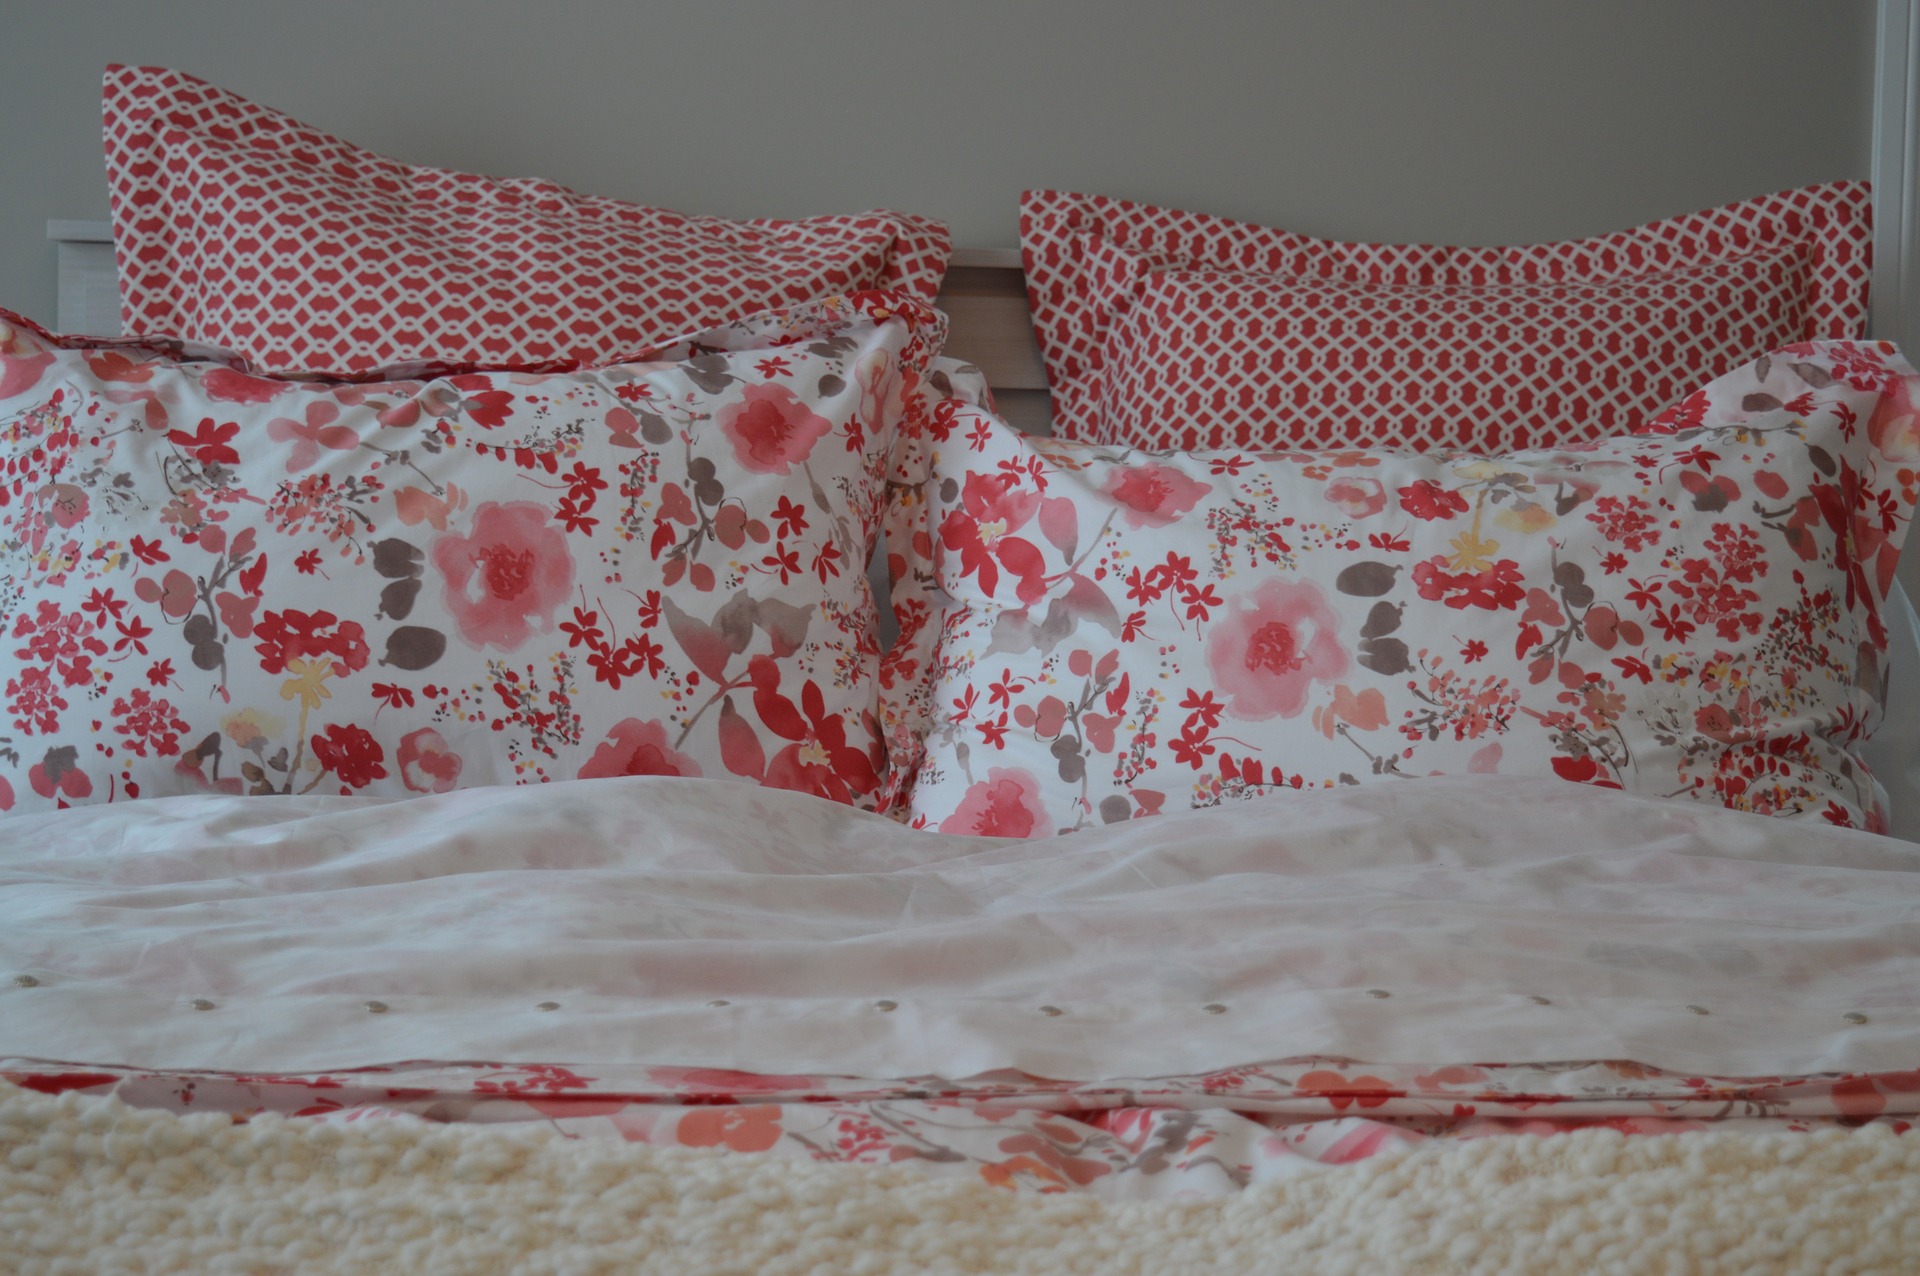 Bedspread and pillows